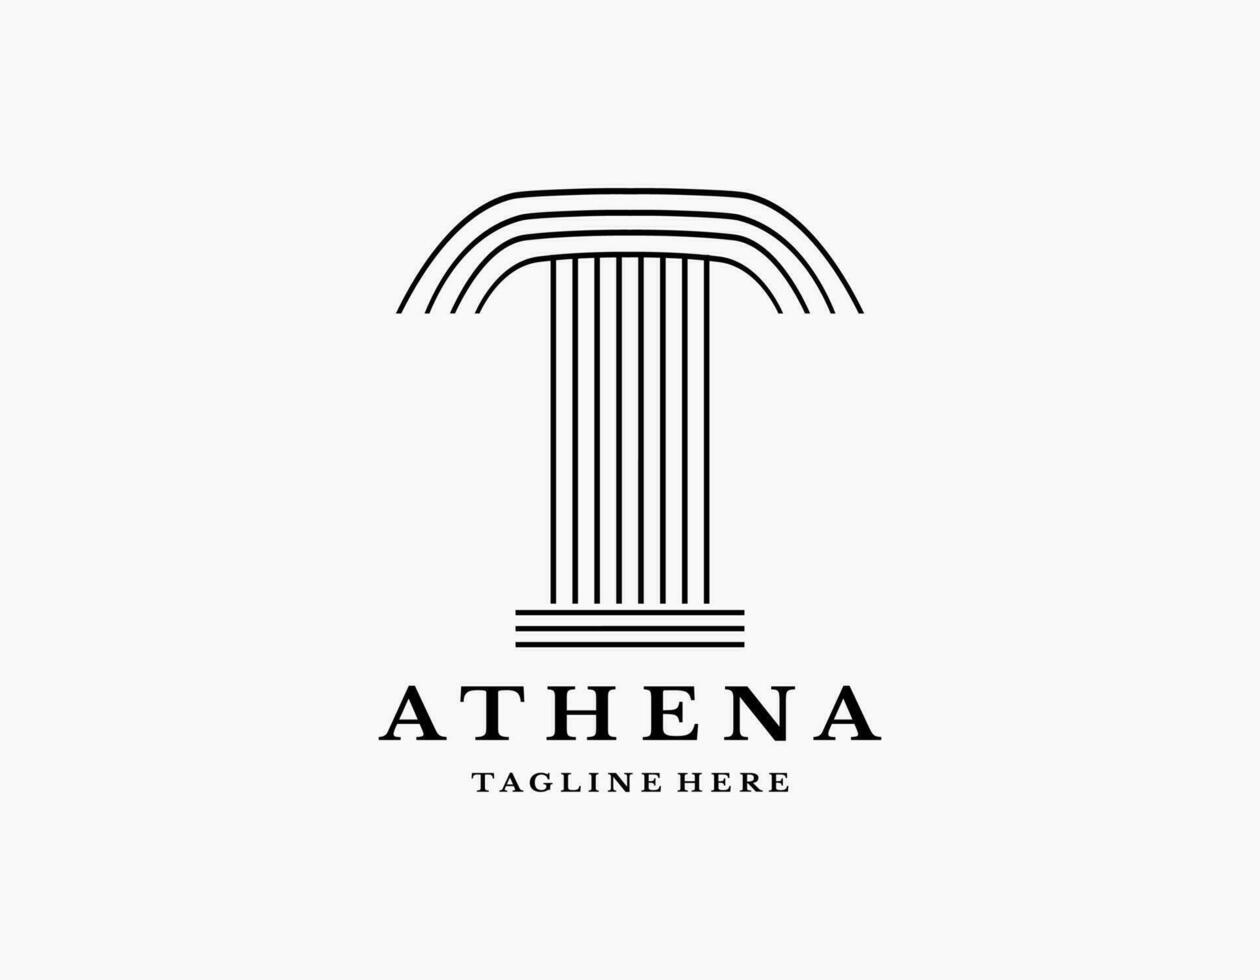 Greek column logo icon with stripes pattern. Letter T pillar column logo design inspiration. Aesthetic minimal design for lawyer, museum, company, architecture, bank. vector